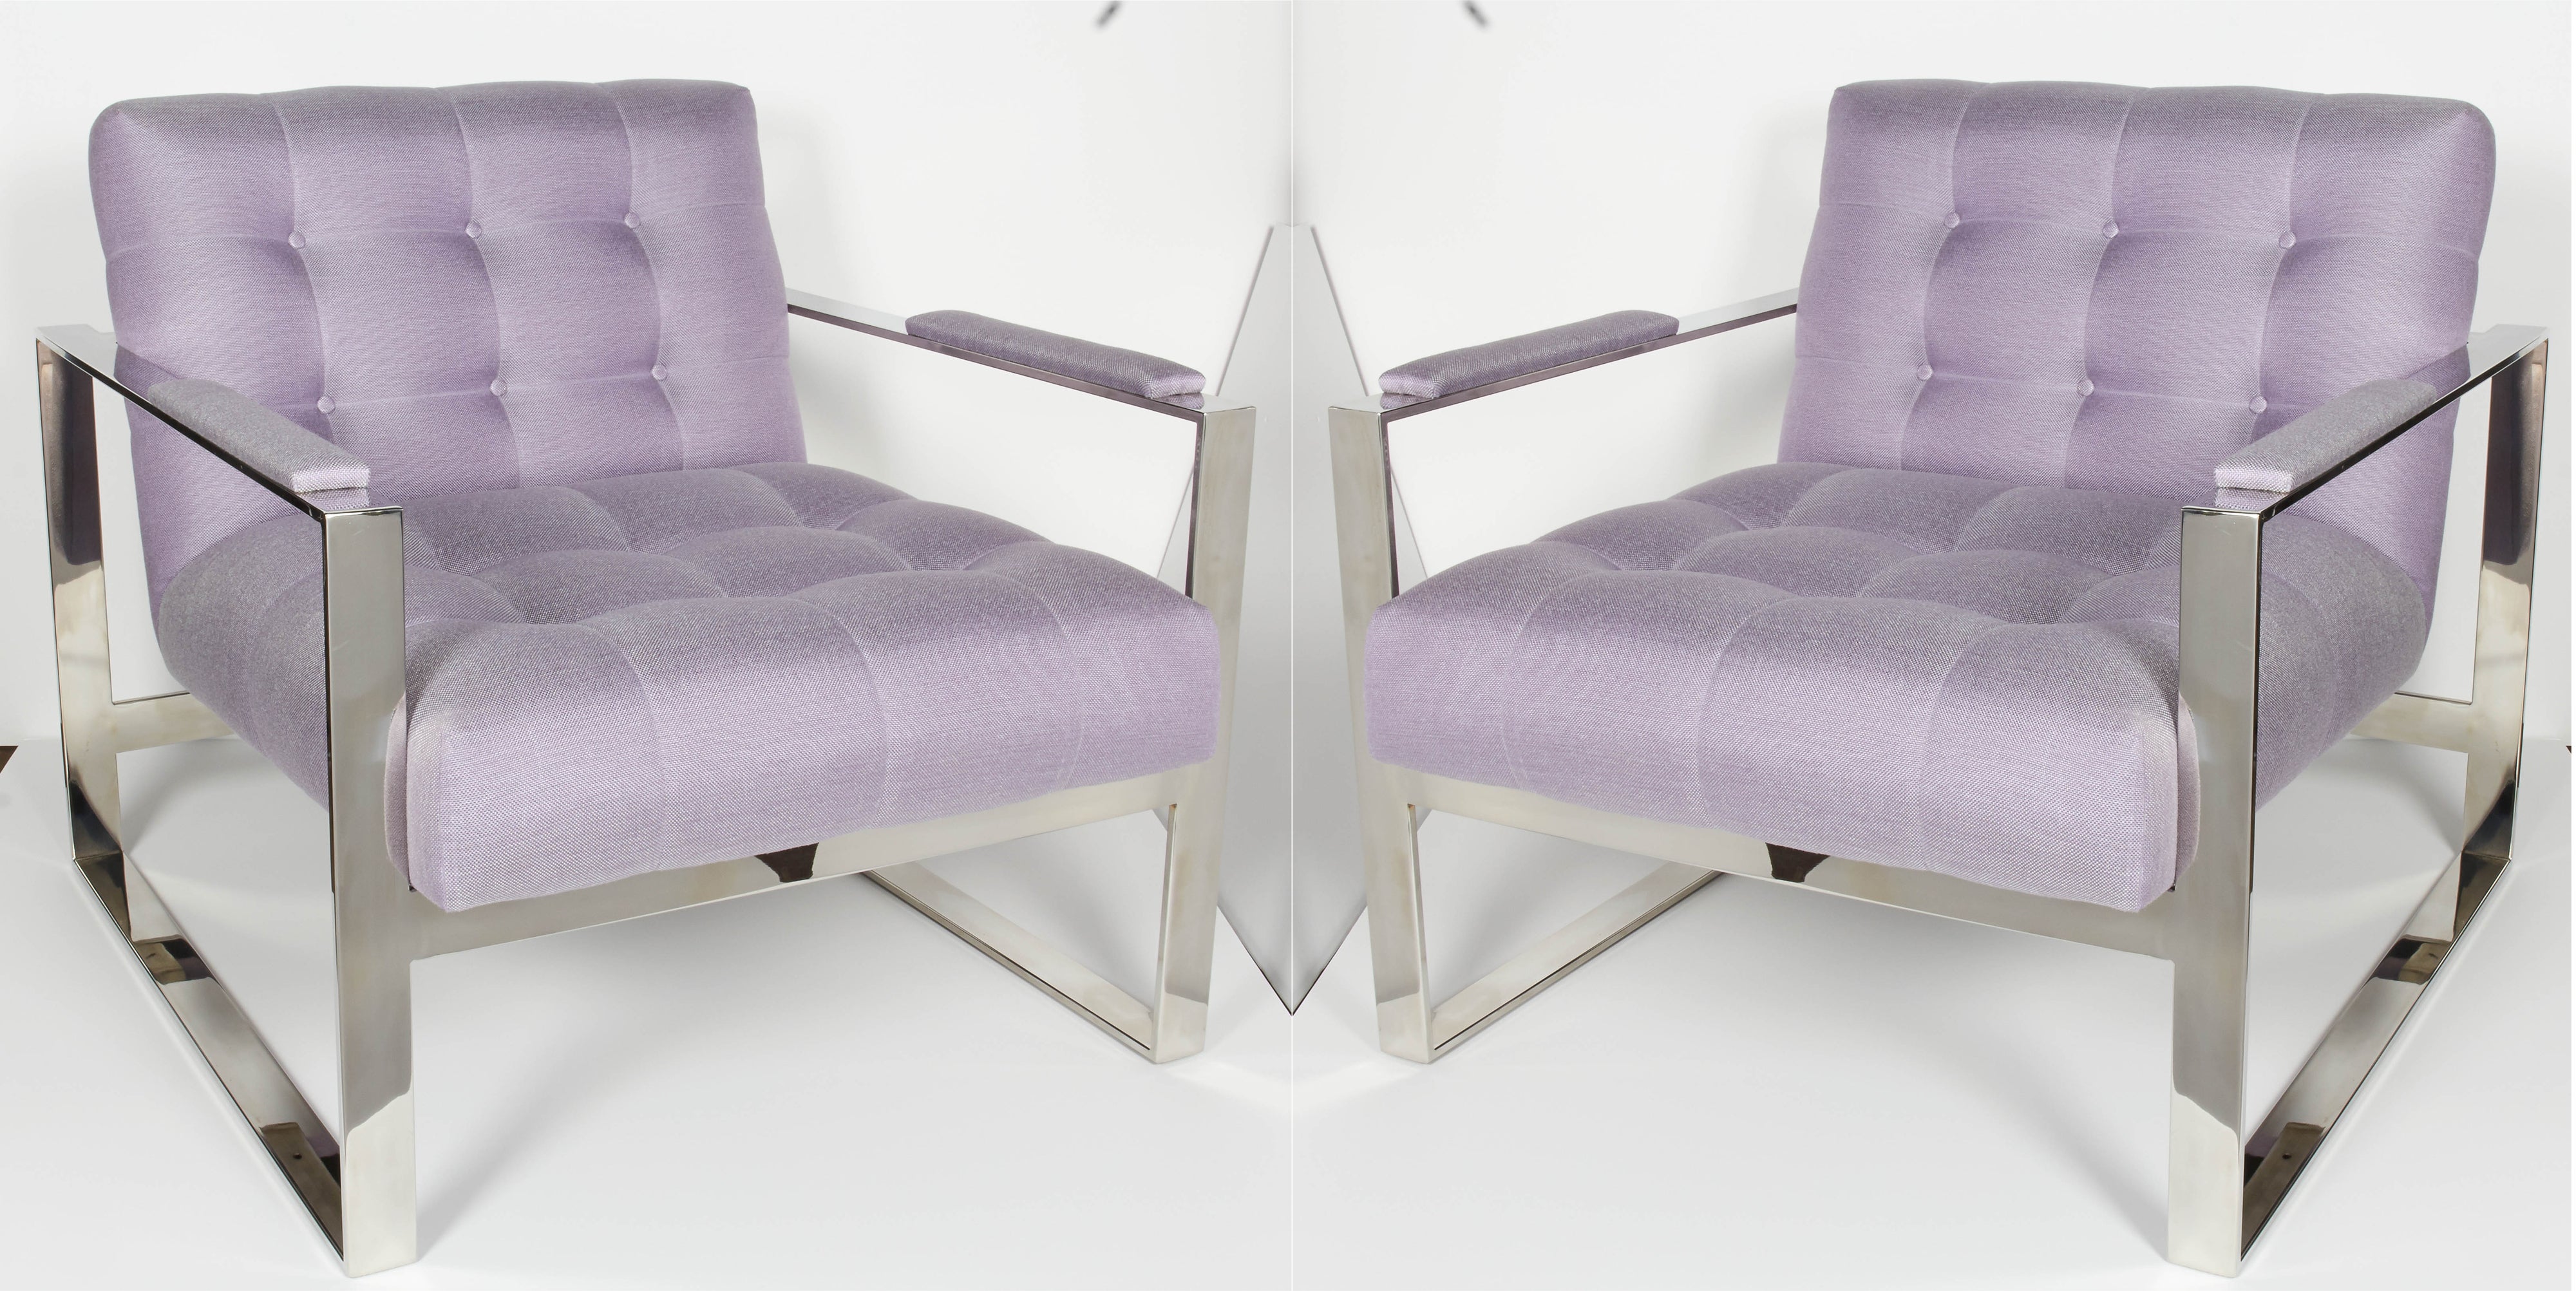 Pair of Lavender Tufted Lounge Chairs Designed by Milo Baughman